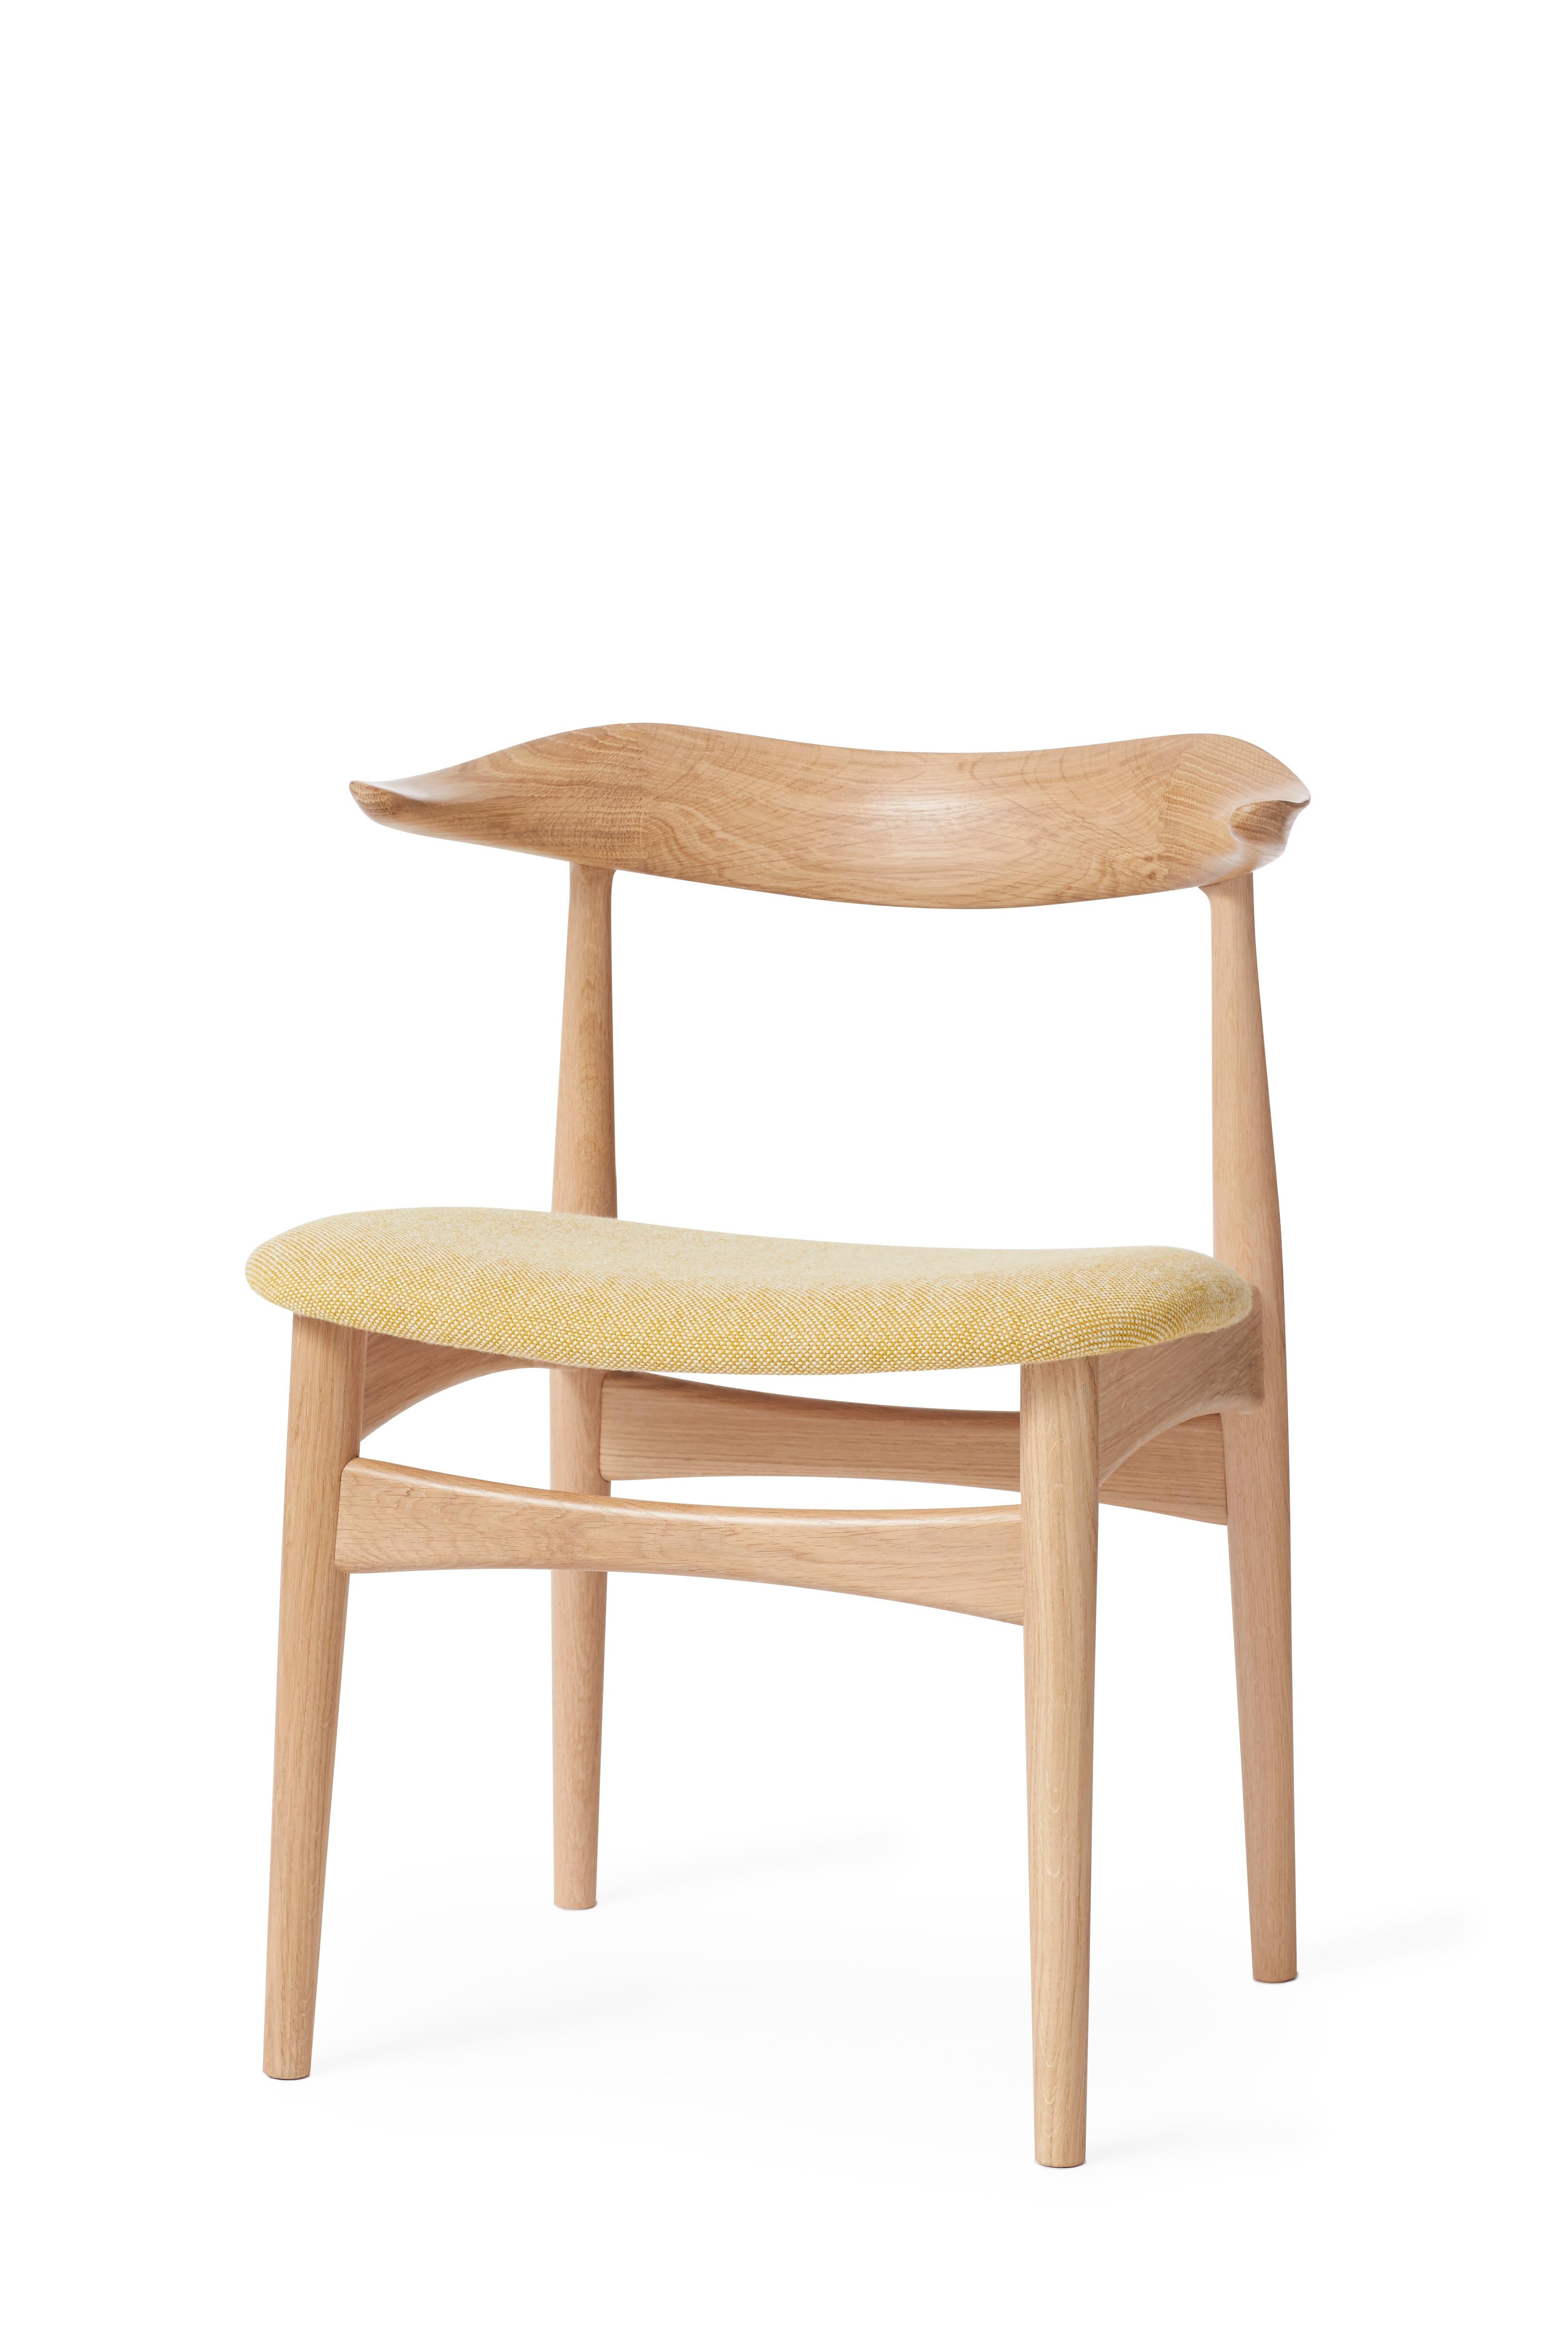 For Sale: Yellow (Hallingdal 407) Cow Horn Oak Chair, by Knud Færch from Warm Nordic 2